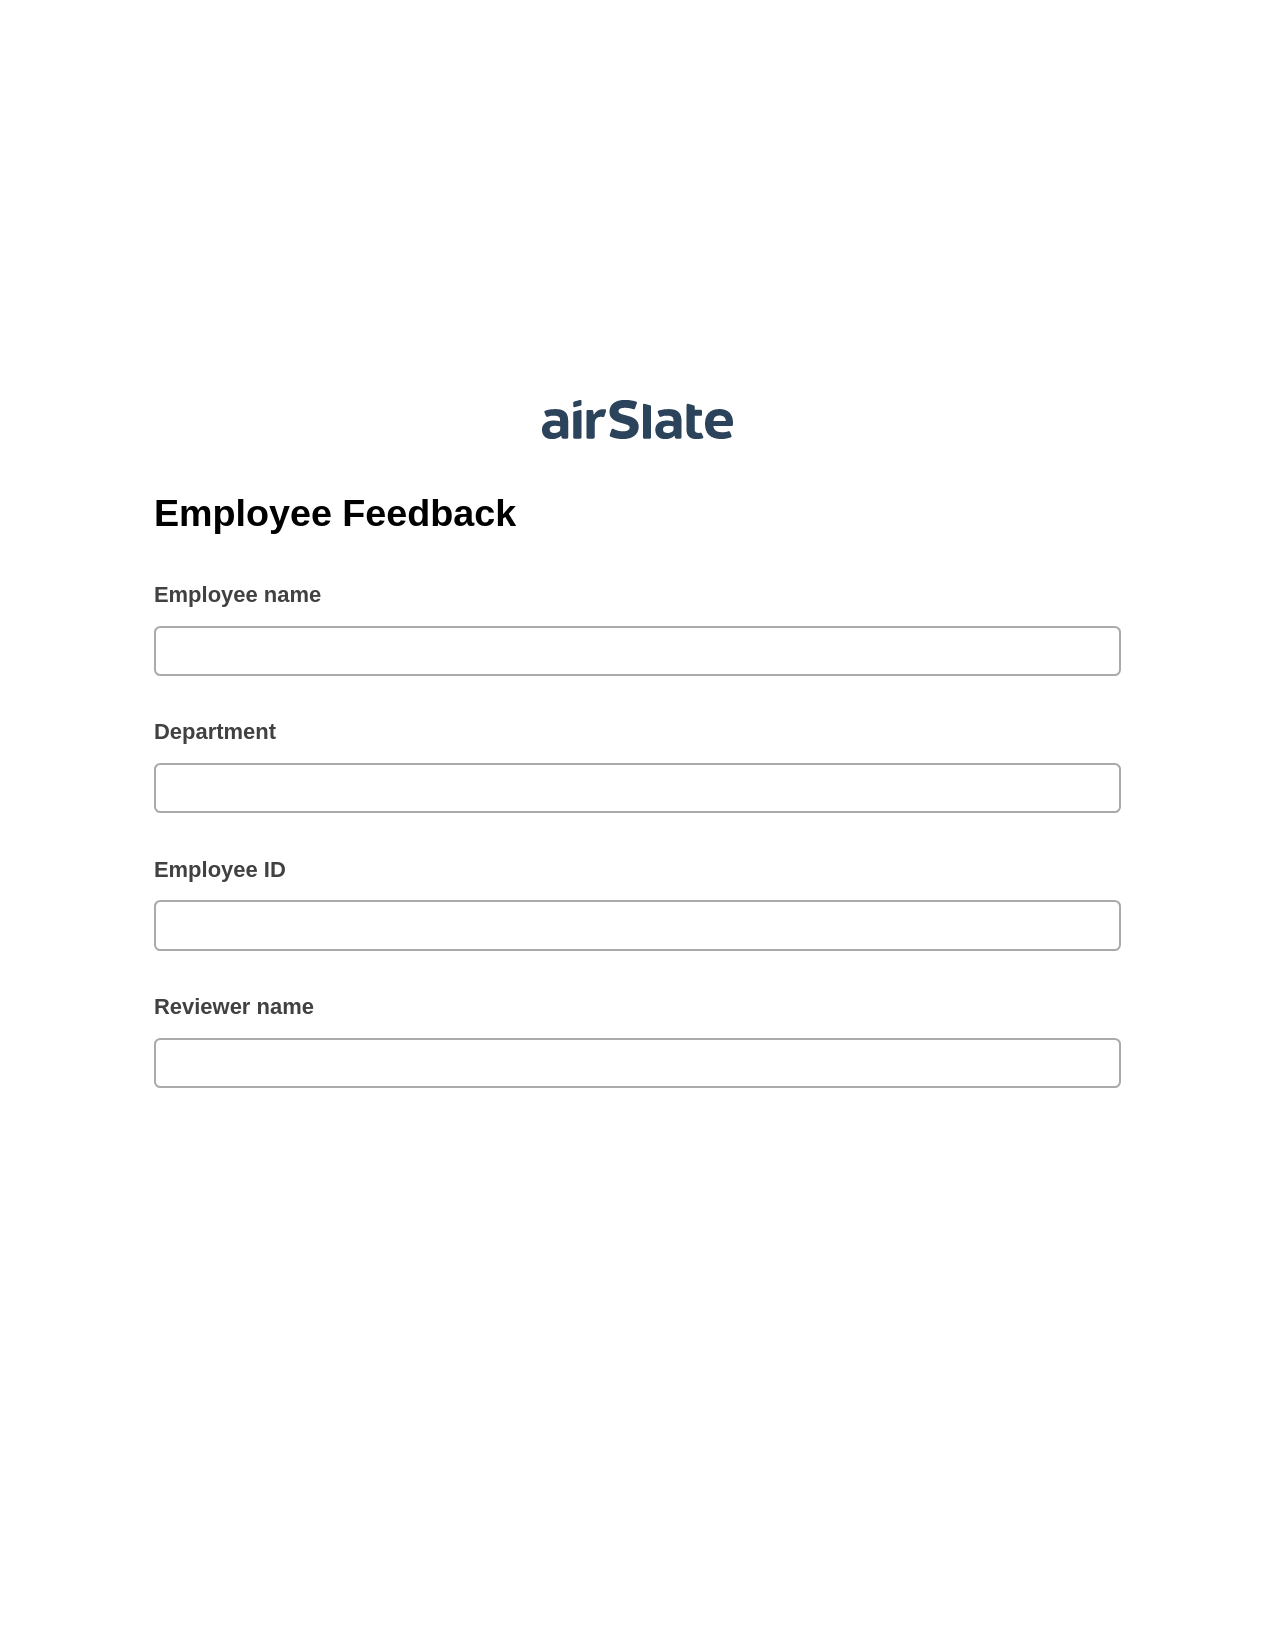 Multirole Employee Feedback Pre-fill from CSV File Bot, Roles Reminder Bot, Export to Smartsheet